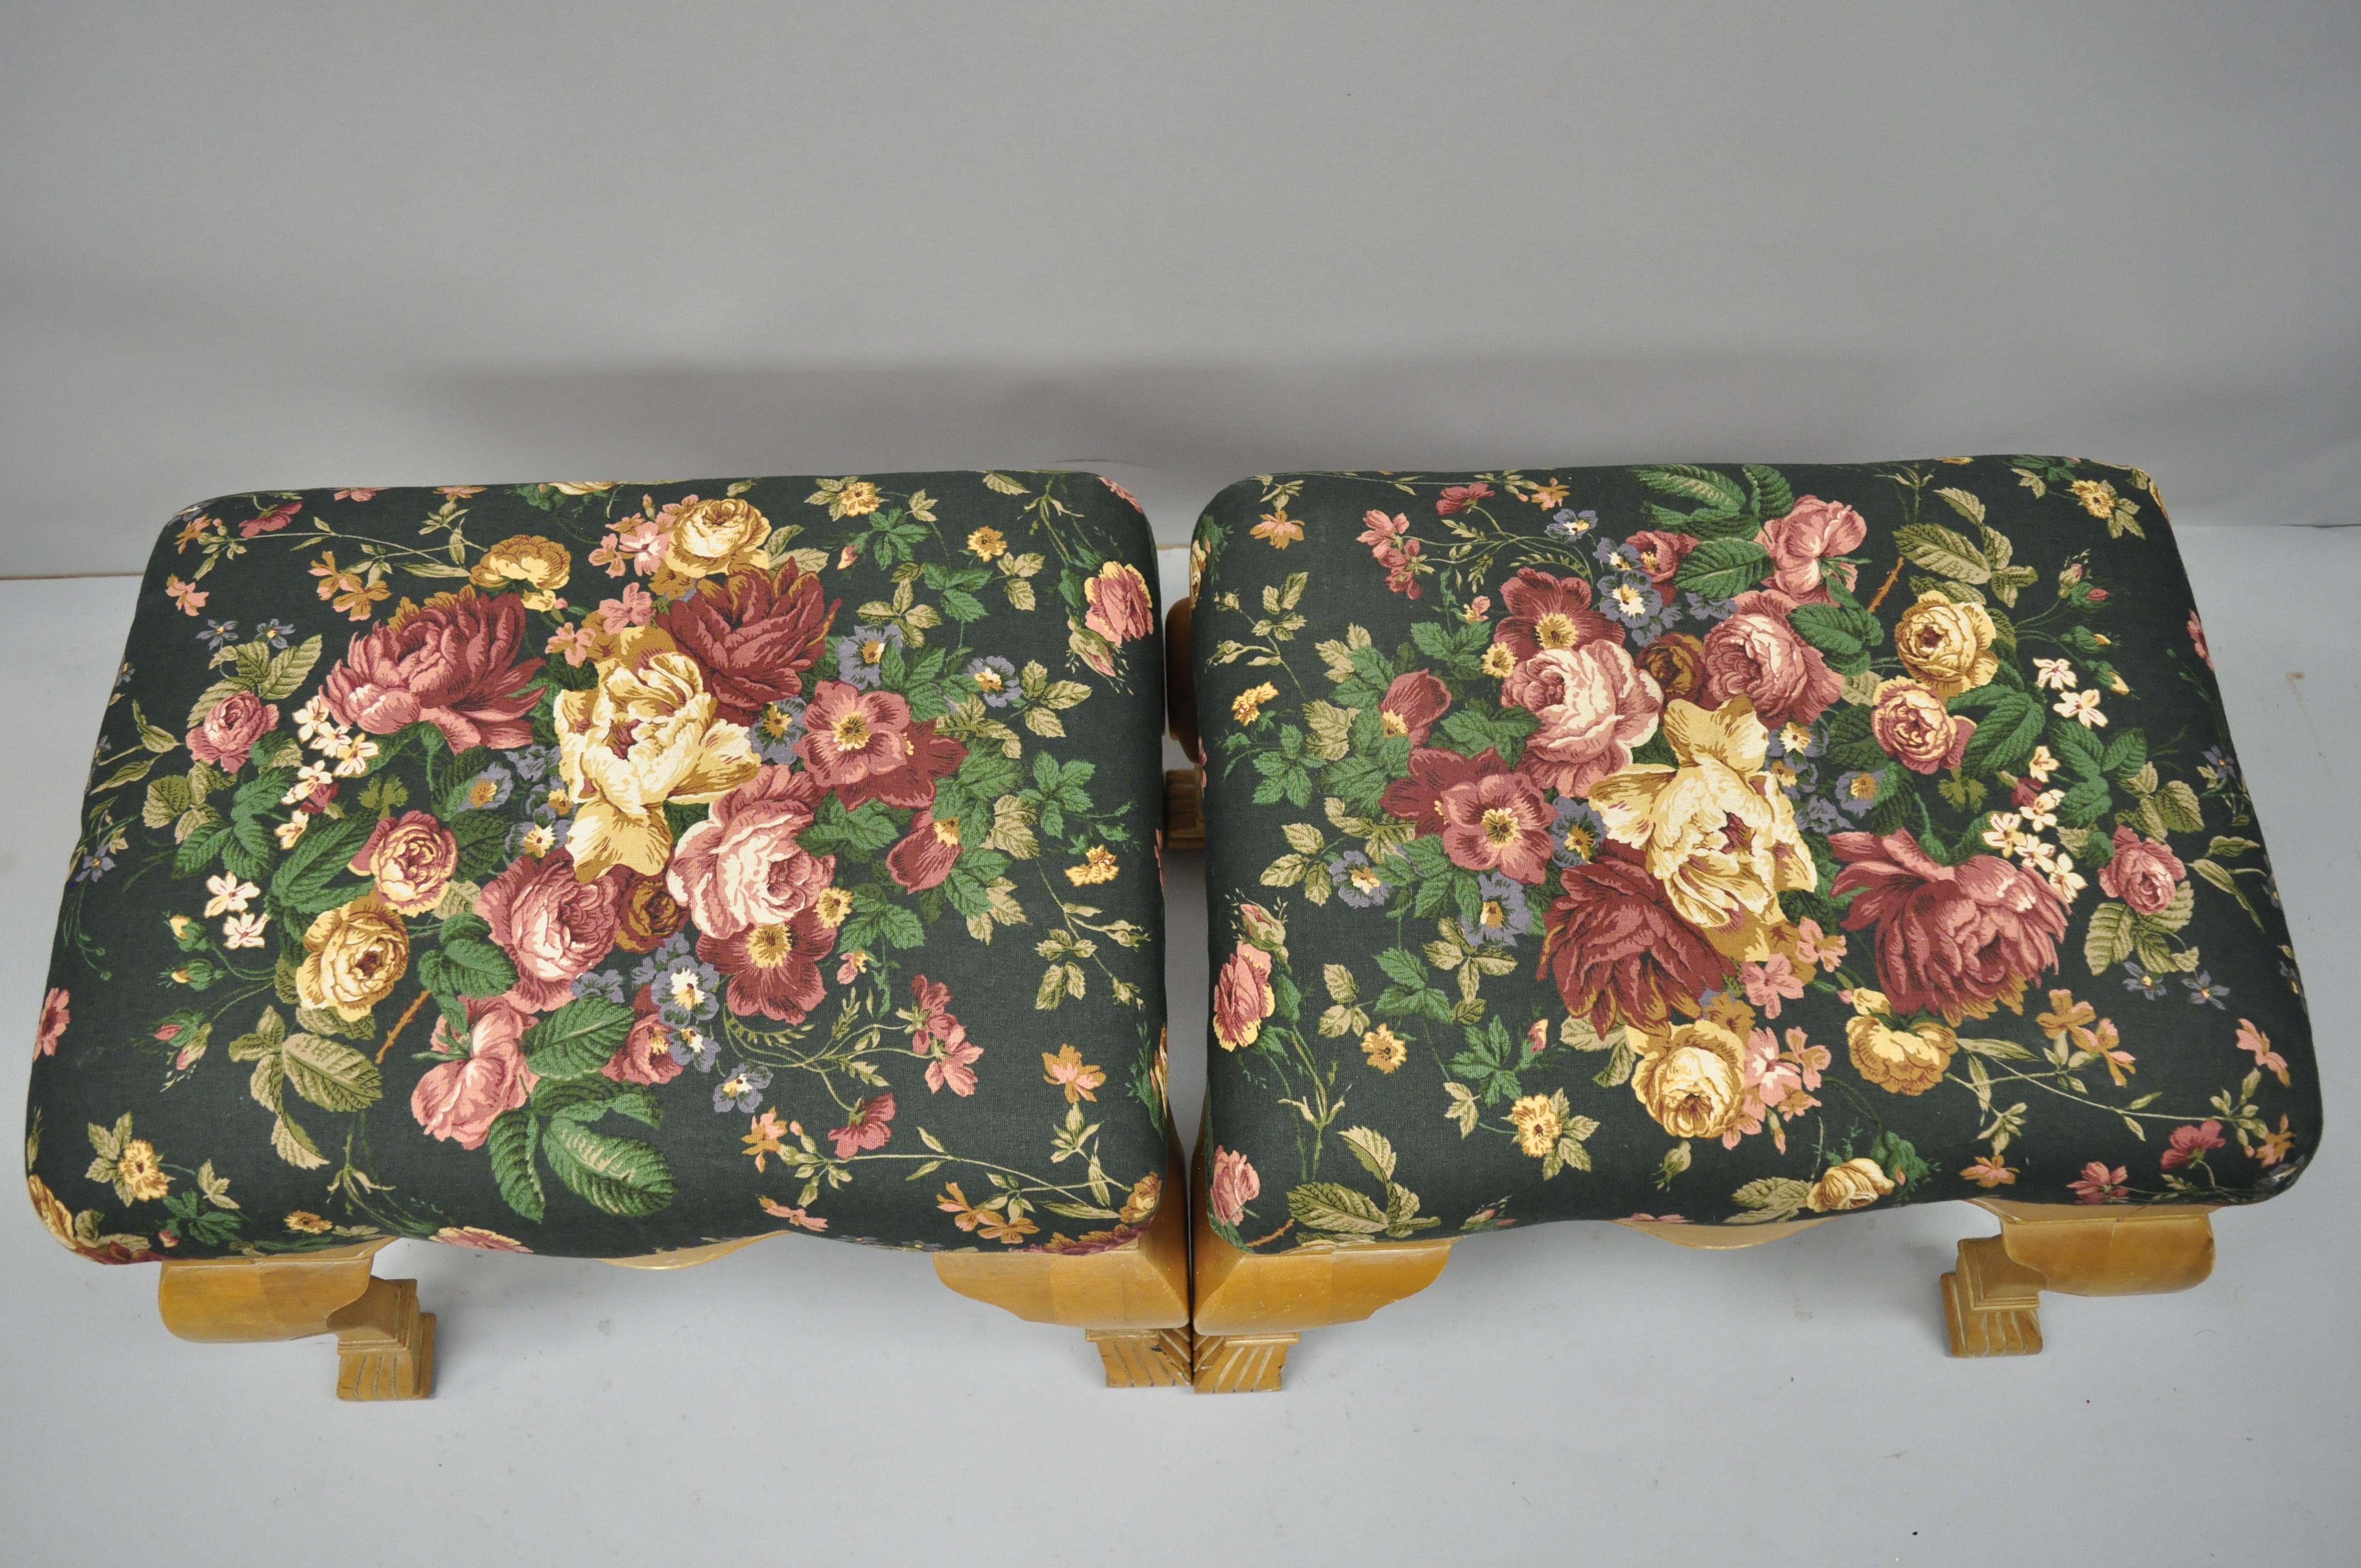 Fabric Pair of Country French Style Cabriole Leg Hoof Foot Upholstered Stools Benches